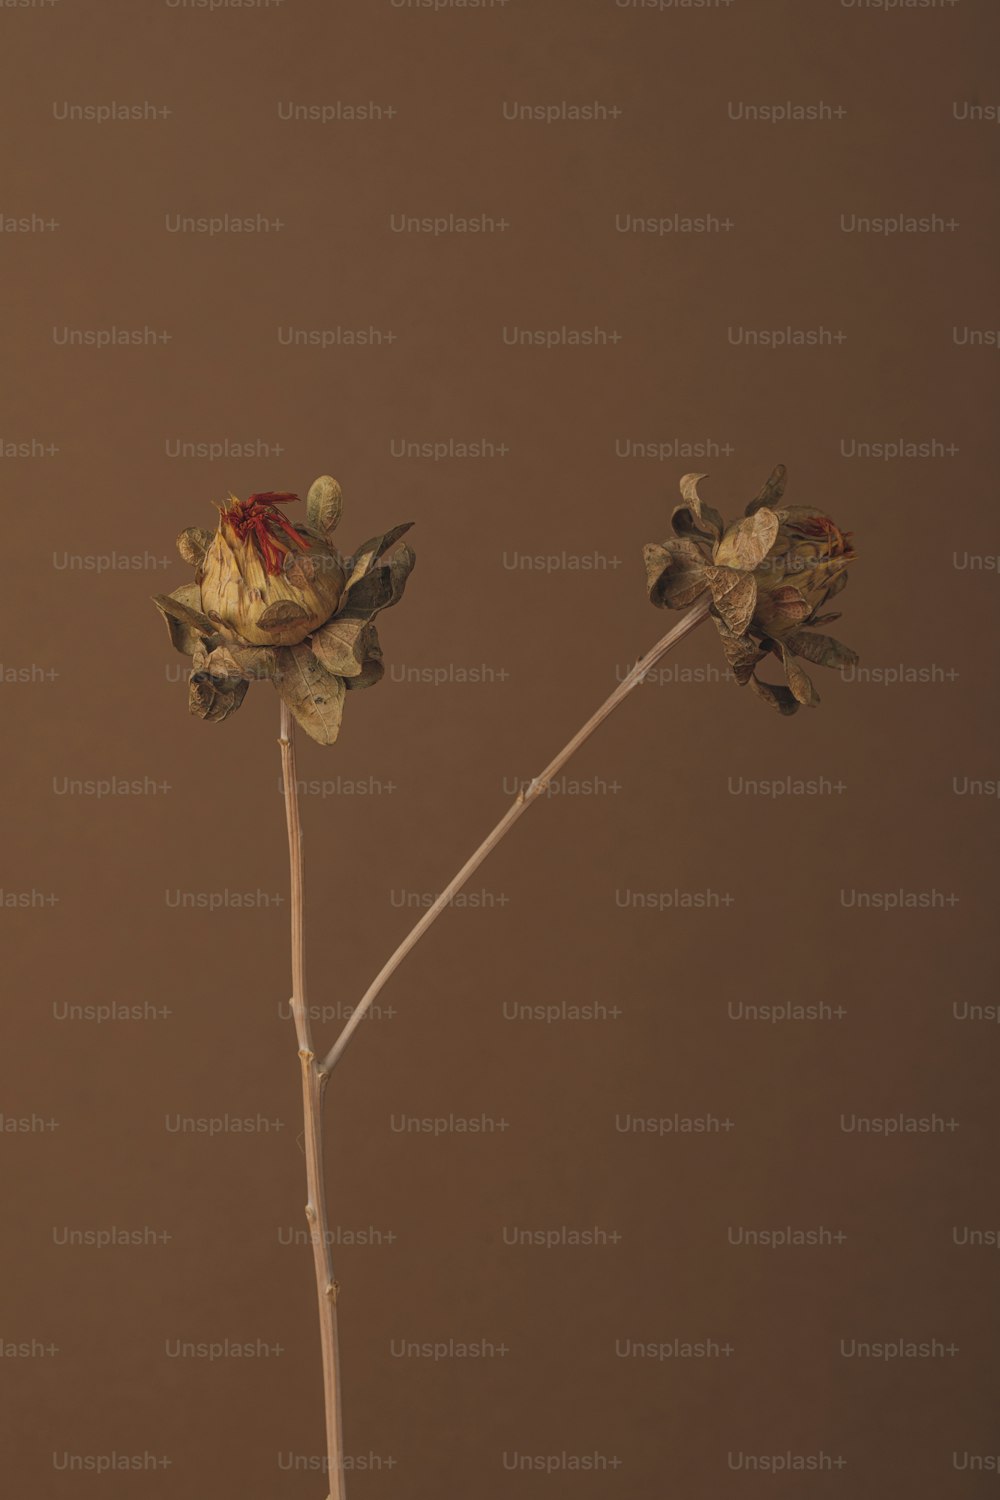 two dead flowers in a vase against a brown background